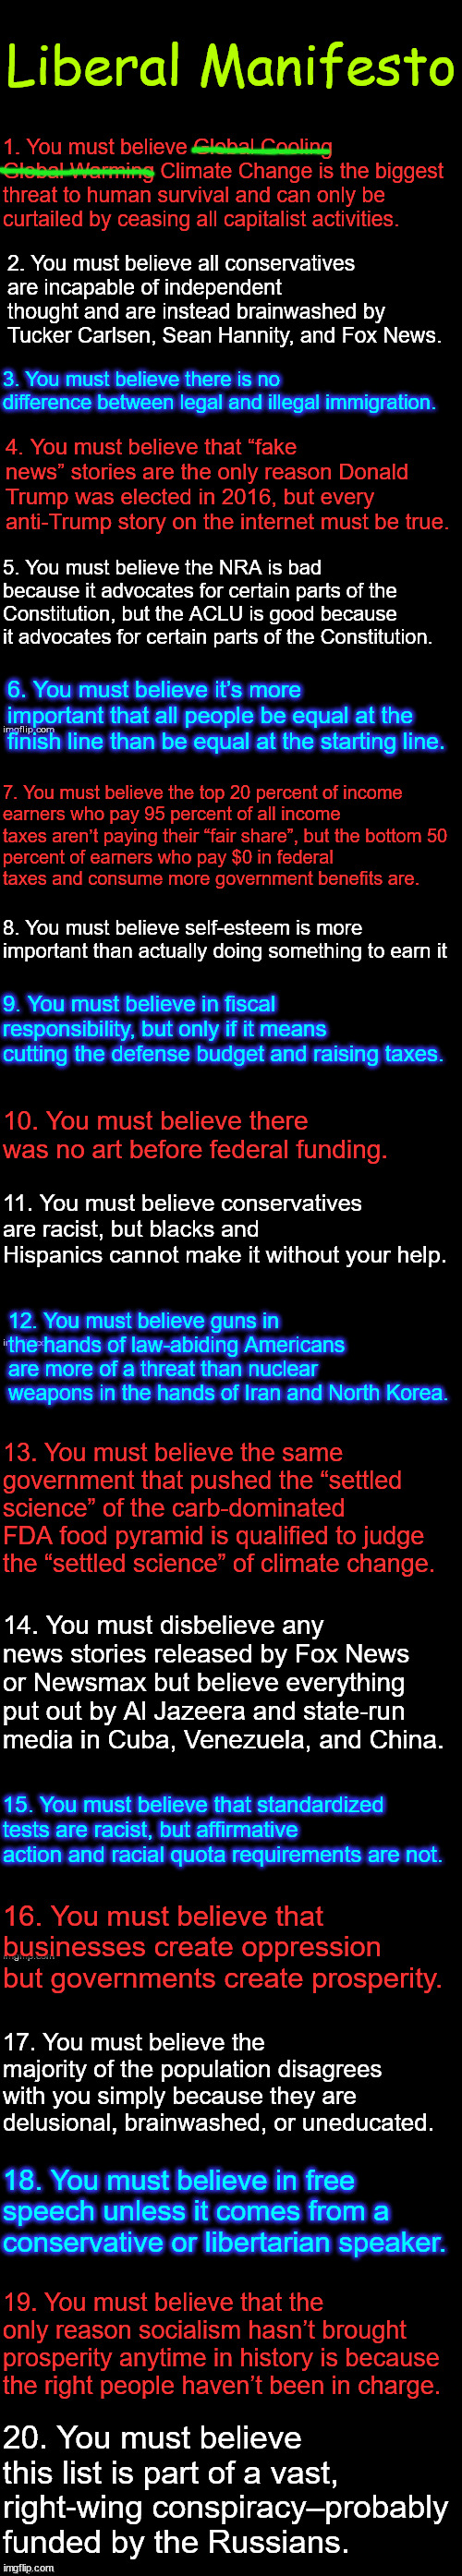 Liberal Manifesto | Liberal Manifesto; 1. You must believe Global Cooling Global Warming Climate Change is the biggest threat to human survival and can only be curtailed by ceasing all capitalist activities. 2. You must believe all conservatives are incapable of independent thought and are instead brainwashed by Tucker Carlsen, Sean Hannity, and Fox News. 3. You must believe there is no difference between legal and illegal immigration. 4. You must believe that “fake news” stories are the only reason Donald Trump was elected in 2016, but every anti-Trump story on the internet must be true. 5. You must believe the NRA is bad because it advocates for certain parts of the Constitution, but the ACLU is good because it advocates for certain parts of the Constitution. 6. You must believe it’s more important that all people be equal at the finish line than be equal at the starting line. 7. You must believe the top 20 percent of income 
earners who pay 95 percent of all income

taxes aren’t paying their “fair share”, but the bottom 50 percent of earners who pay $0 in federal taxes and consume more government benefits are. 8. You must believe self-esteem is more important than actually doing something to earn it; 9. You must believe in fiscal responsibility, but only if it means cutting the defense budget and raising taxes. 10. You must believe there was no art before federal funding. 11. You must believe conservatives are racist, but blacks and Hispanics cannot make it without your help. 12. You must believe guns in the hands of law-abiding Americans are more of a threat than nuclear weapons in the hands of Iran and North Korea. 13. You must believe the same government that pushed the “settled science” of the carb-dominated FDA food pyramid is qualified to judge the “settled science” of climate change. 14. You must disbelieve any news stories released by Fox News or Newsmax but believe everything put out by Al Jazeera and state-run media in Cuba, Venezuela, and China. 15. You must believe that standardized tests are racist, but affirmative action and racial quota requirements are not. 16. You must believe that businesses create oppression but governments create prosperity. 17. You must believe the majority of the population disagrees with you simply because they are delusional, brainwashed, or uneducated. 18. You must believe in free speech unless it comes from a conservative or libertarian speaker. 19. You must believe that the only reason socialism hasn’t brought prosperity anytime in history is because the right people haven’t been in charge. 20. You must believe this list is part of a vast, right-wing conspiracy–probably funded by the Russians. | image tagged in liberals,manifesto | made w/ Imgflip meme maker